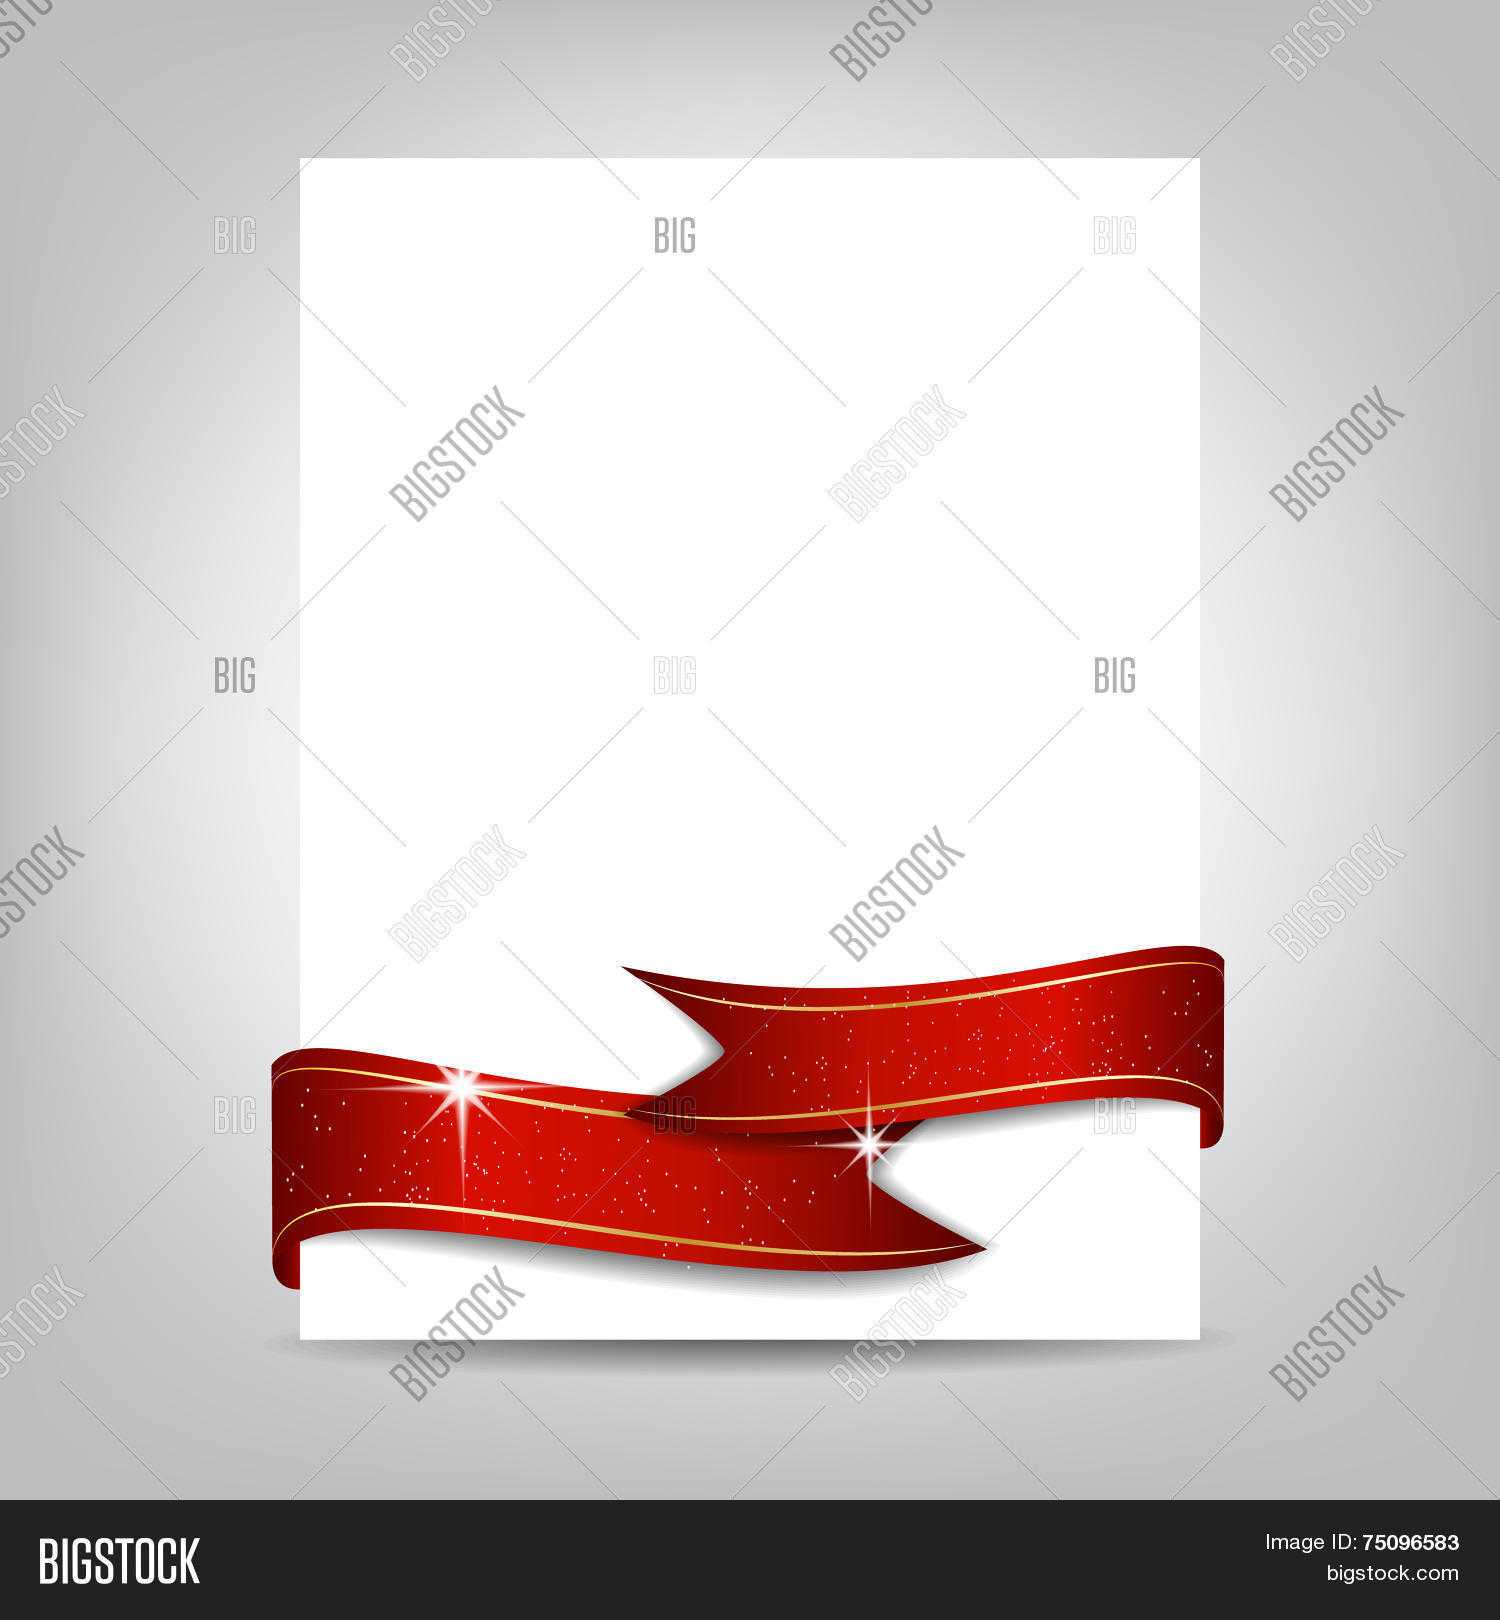 Christmas Flyer Vector & Photo (Free Trial) | Bigstock Within Christmas Brochure Templates Free